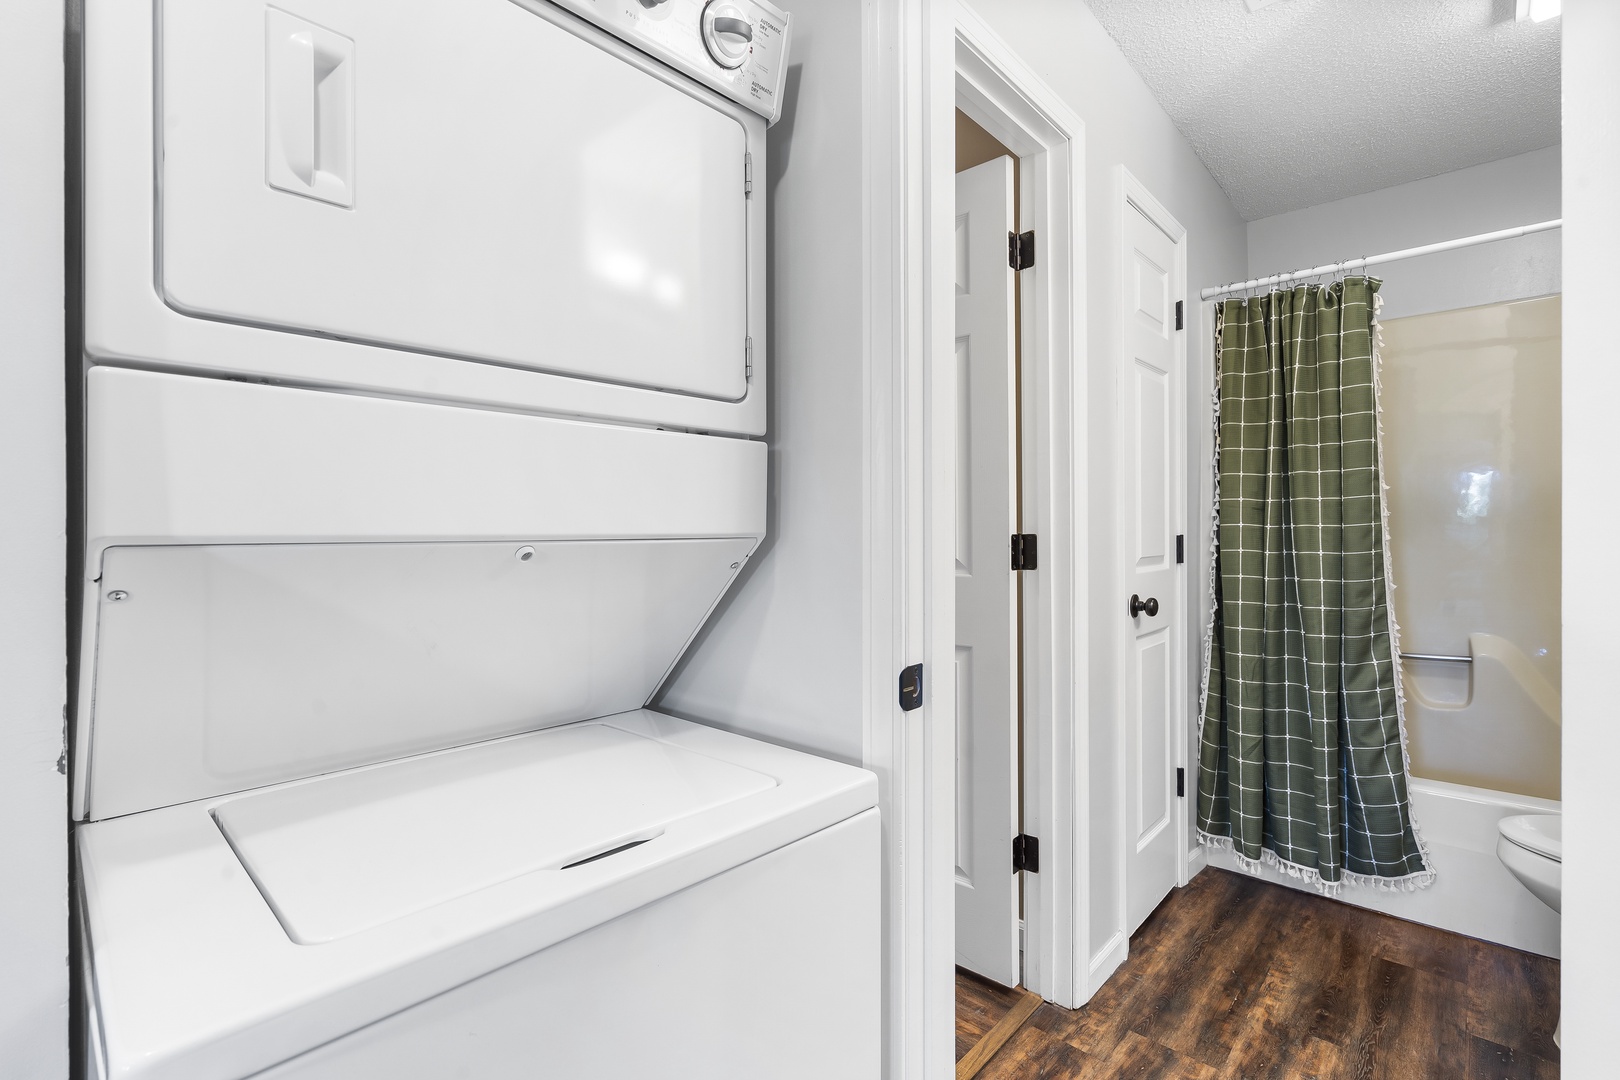 Both condos offer private laundry for your stay, tucked away off the bathroom